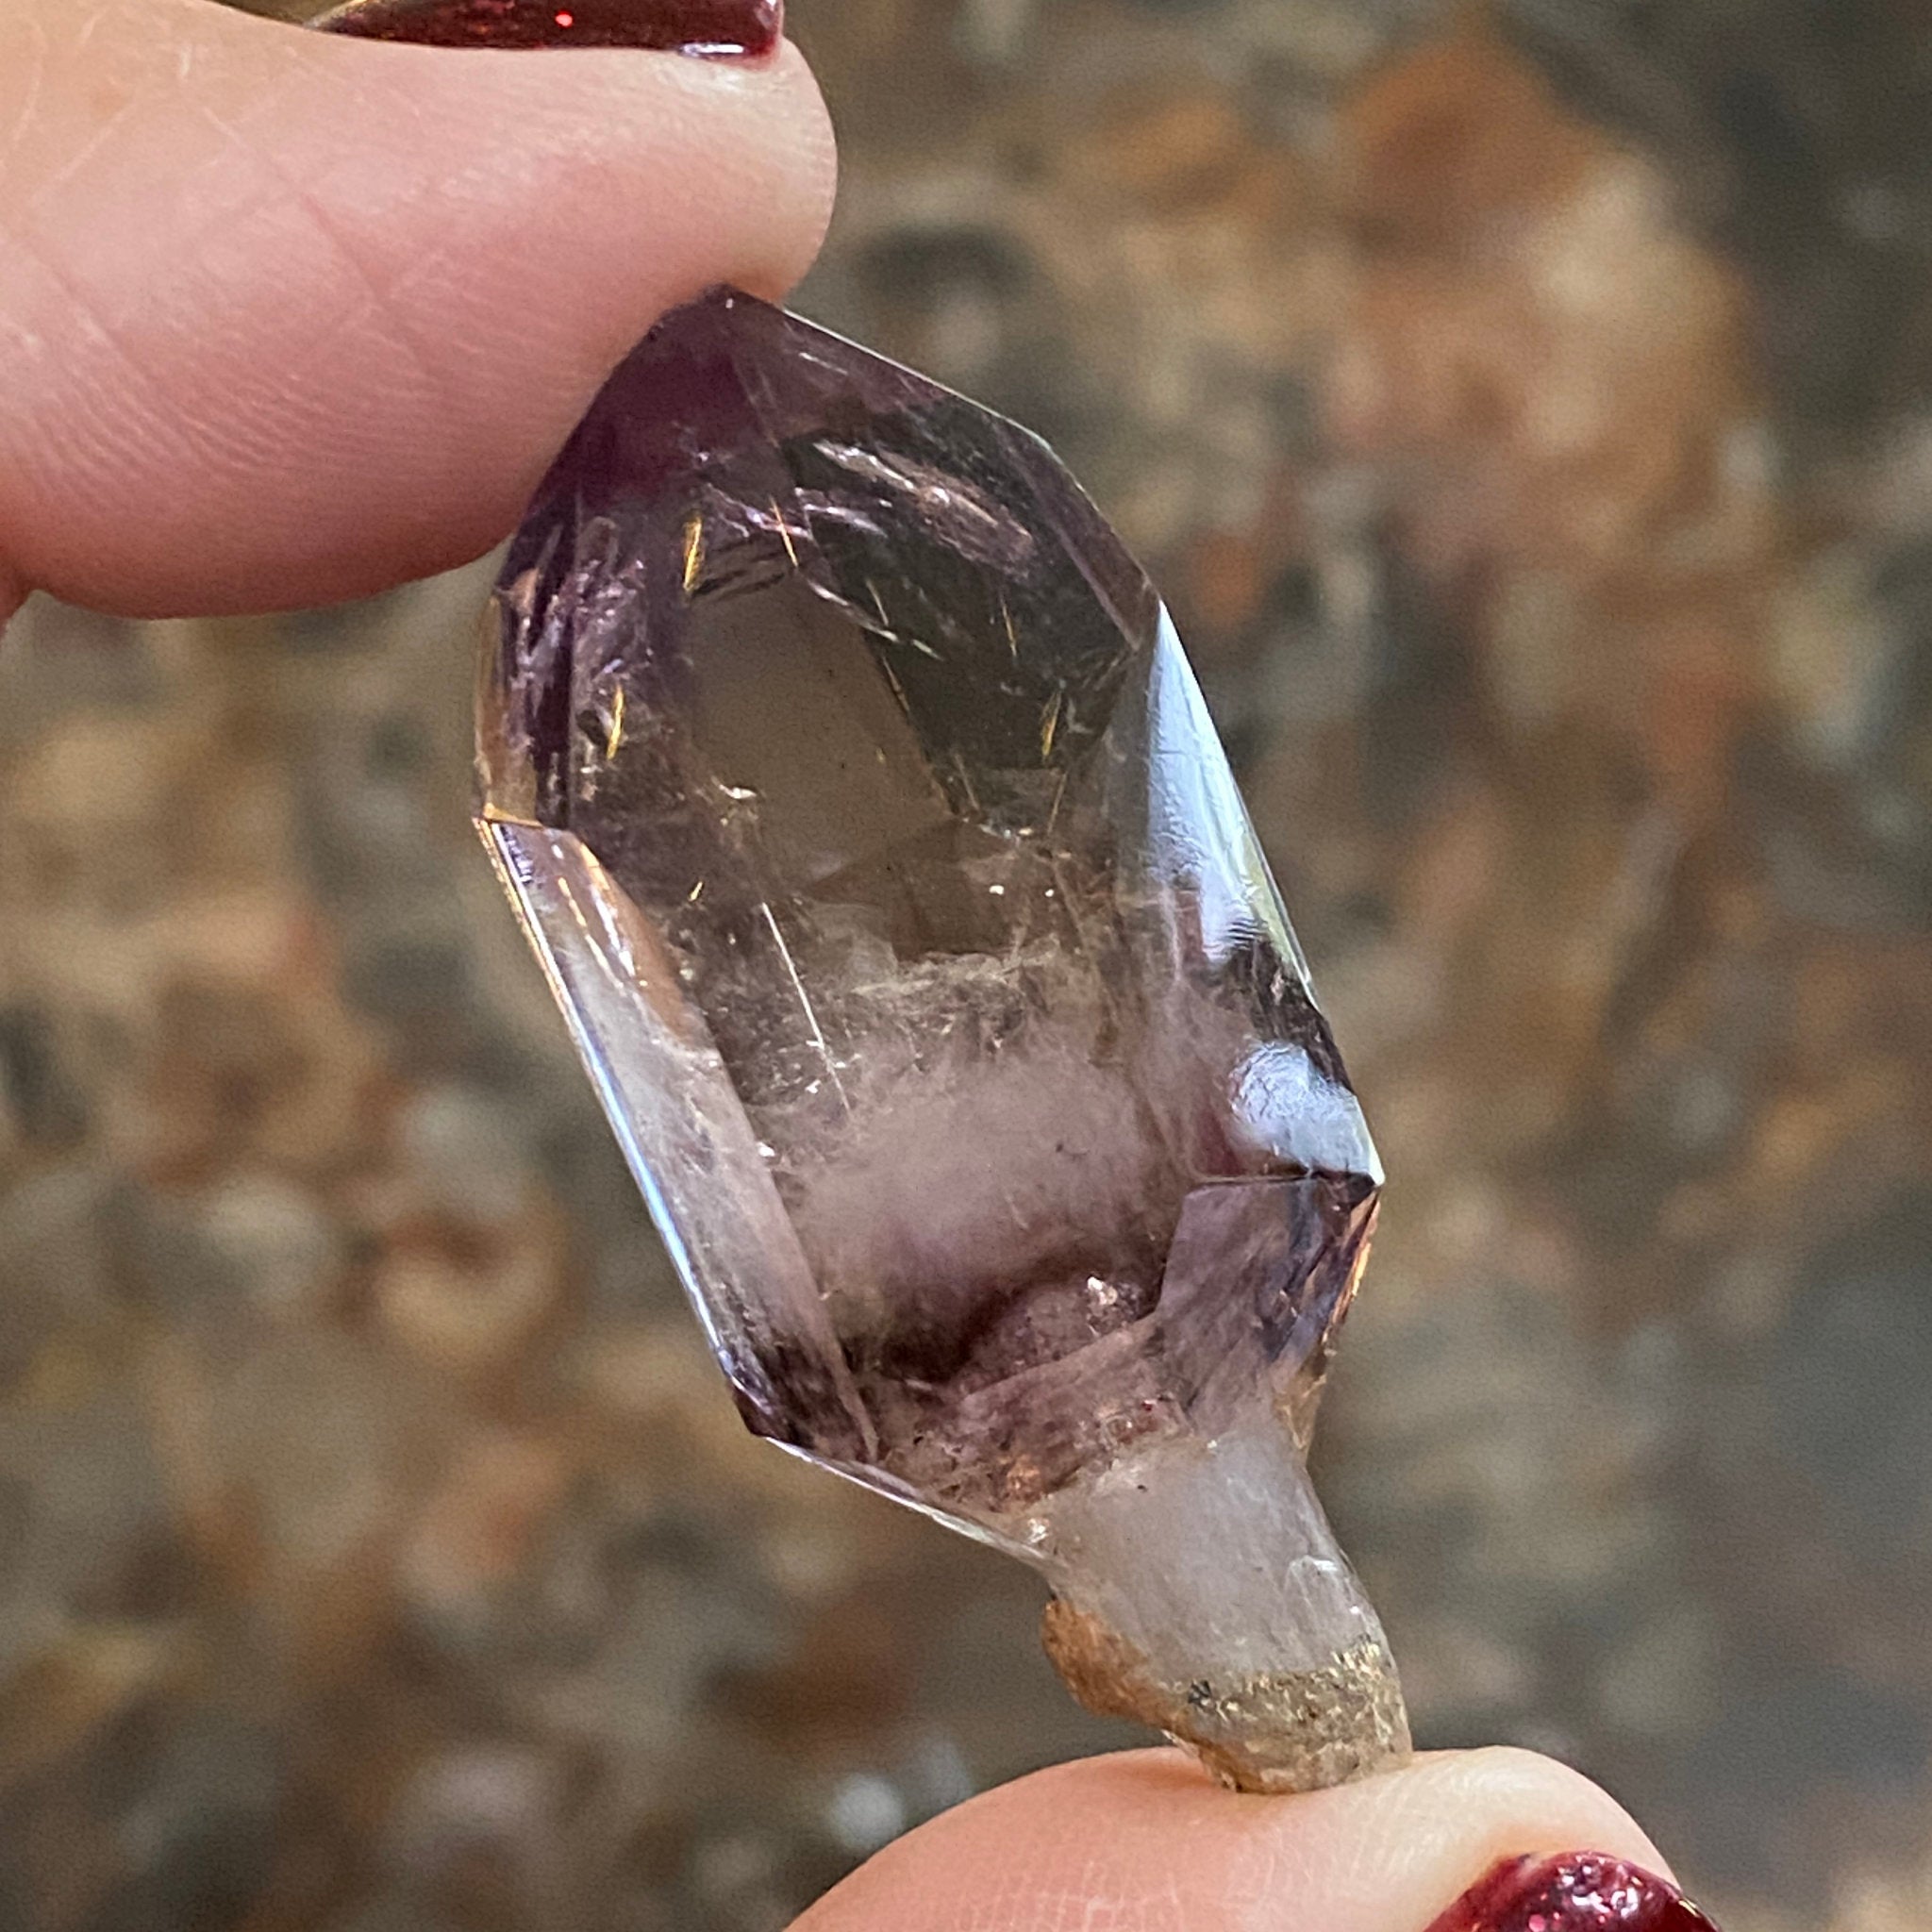 Polished Shangaan Amethyst Sceptre with Enhydro